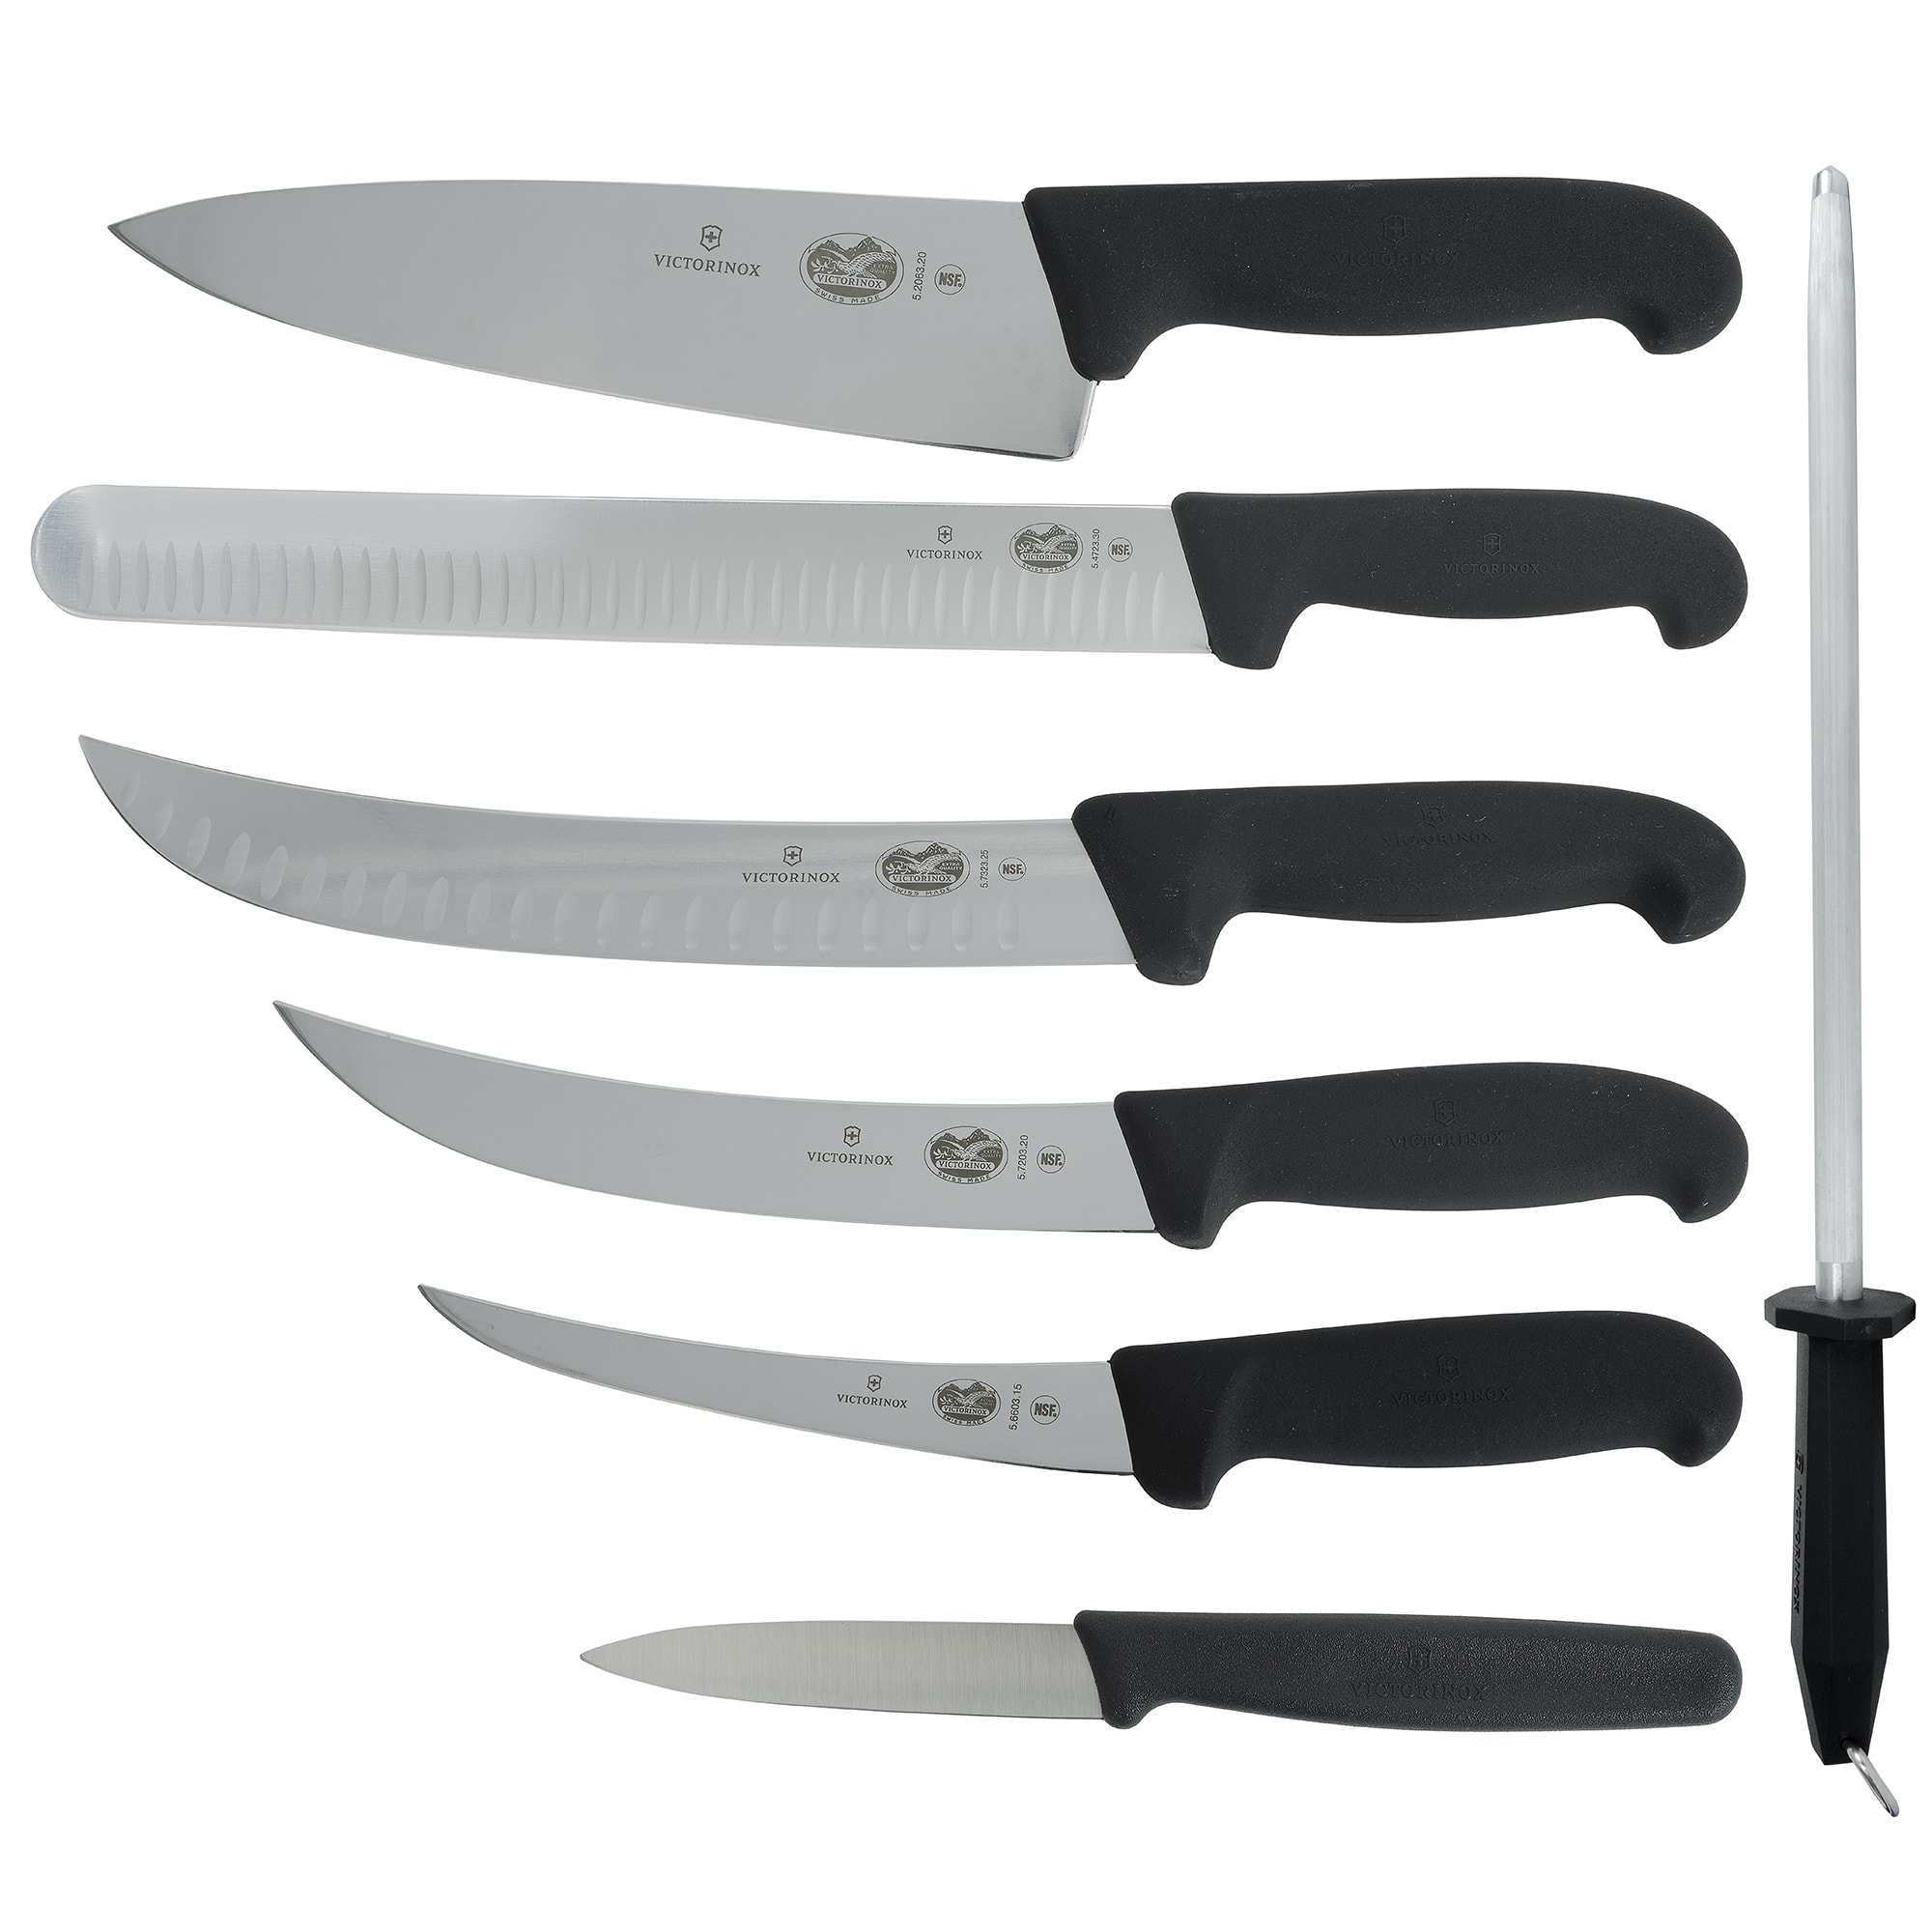 Victorinox - Swiss 5.1003.81-X3 Piece Competition Set - Stainless Steel, Black Handles